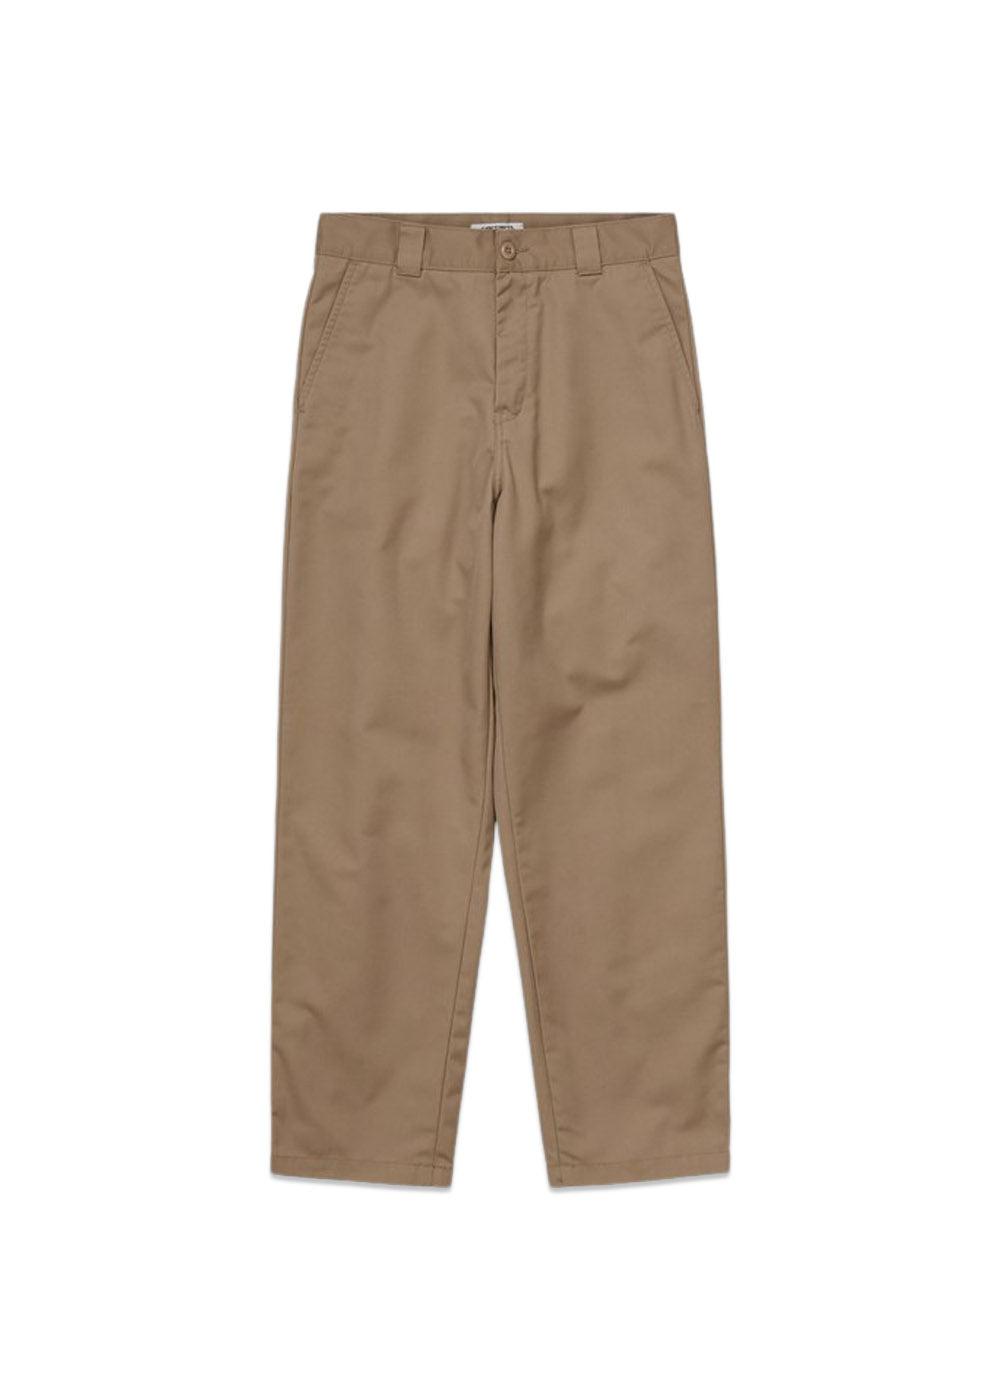 Carhartt WIP's W' Master pant - Dunmore Twill. Køb bukser her.